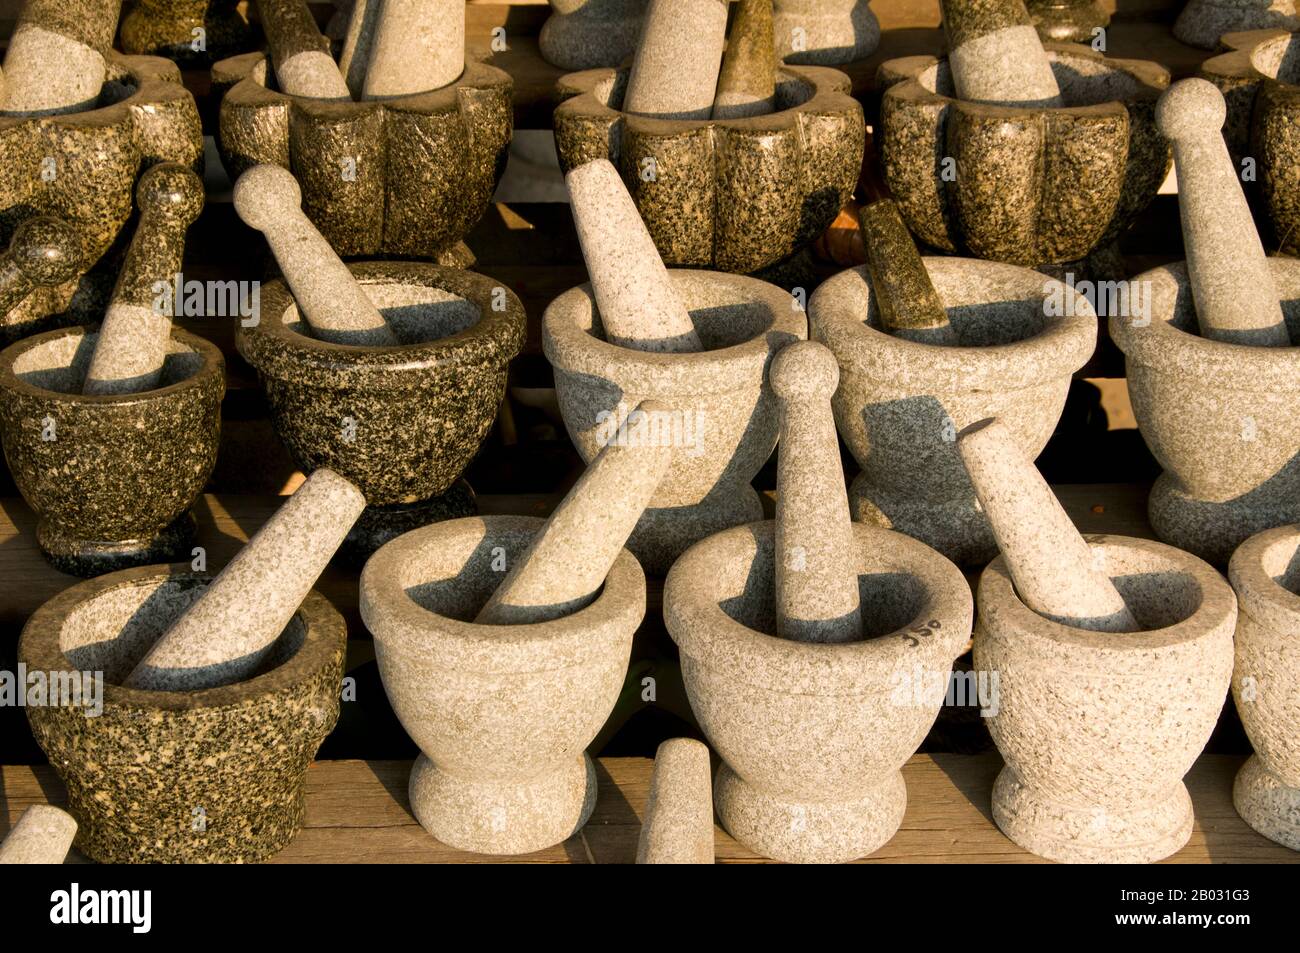 The fishing village of Ang Sila (see pxx) in Chonburi Province is renowned throughout the Eastern Seaboard and Bangkok for producing finely-crafted household implements such as pestles and mortars, as well as figurines of people and animals, from locally-sourced granite. Stock Photo